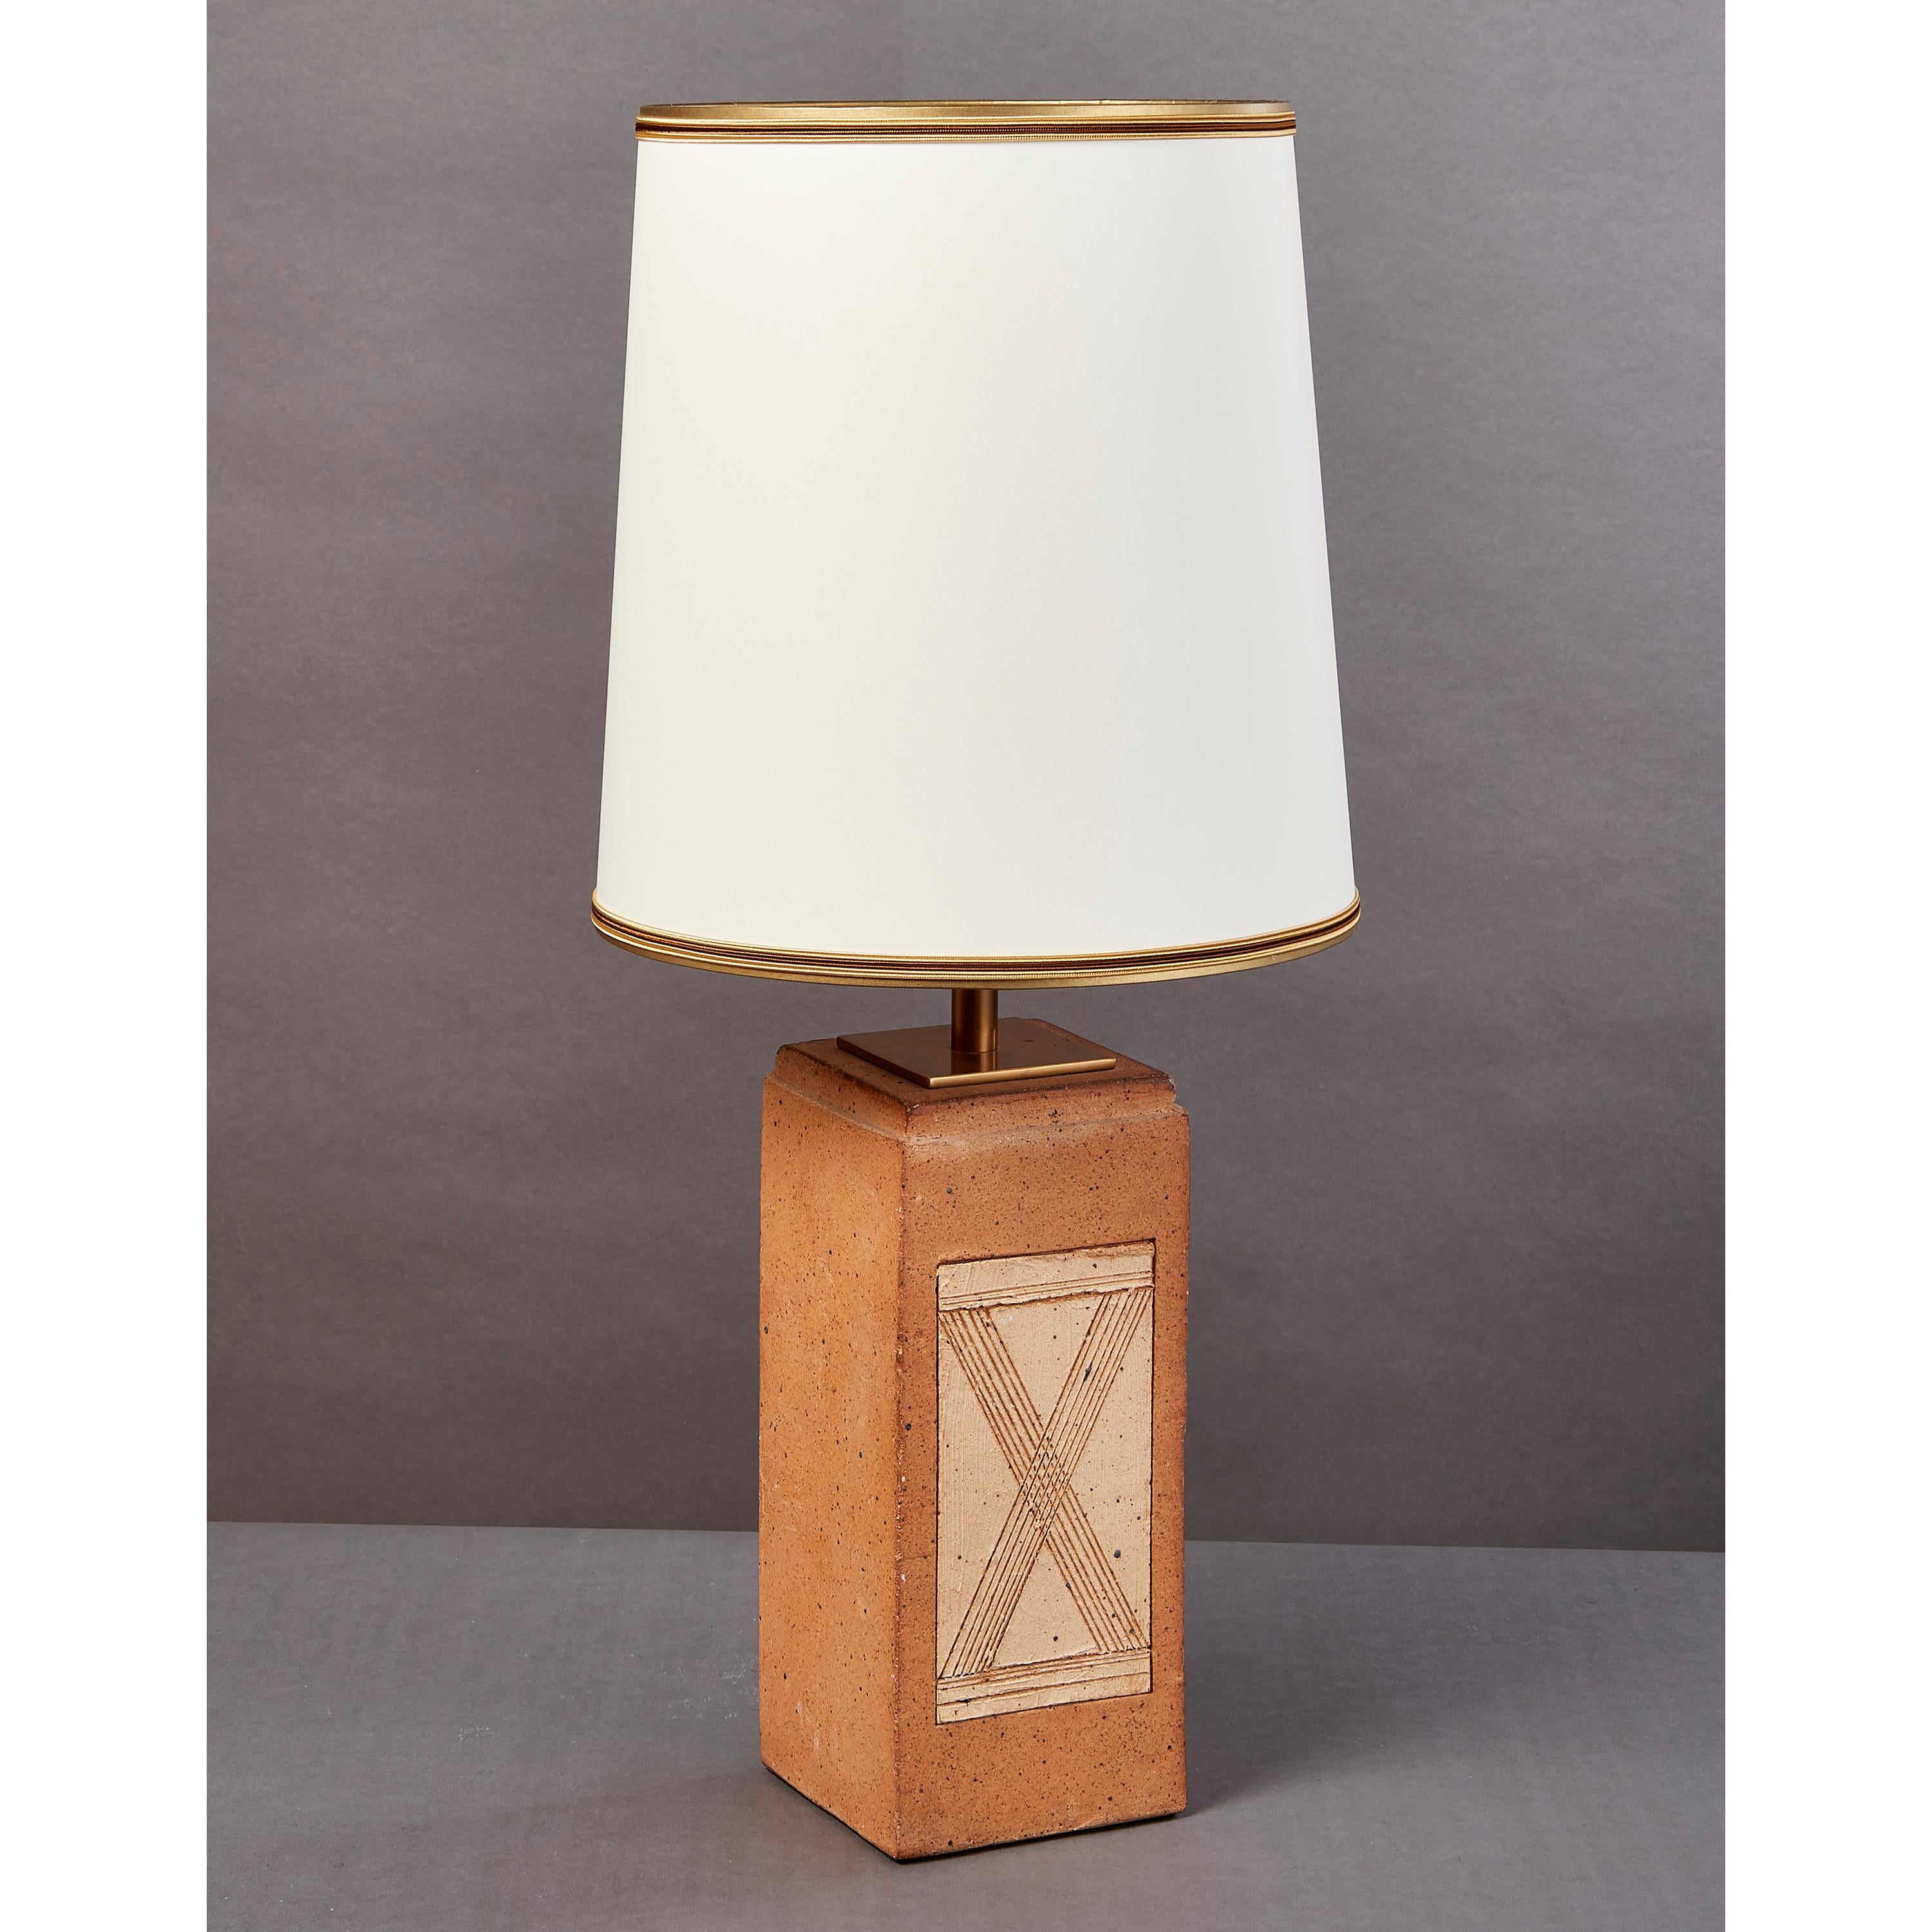 Late 20th Century Geometric Ceramic Lamp with Abstract Decor, France, 1970s